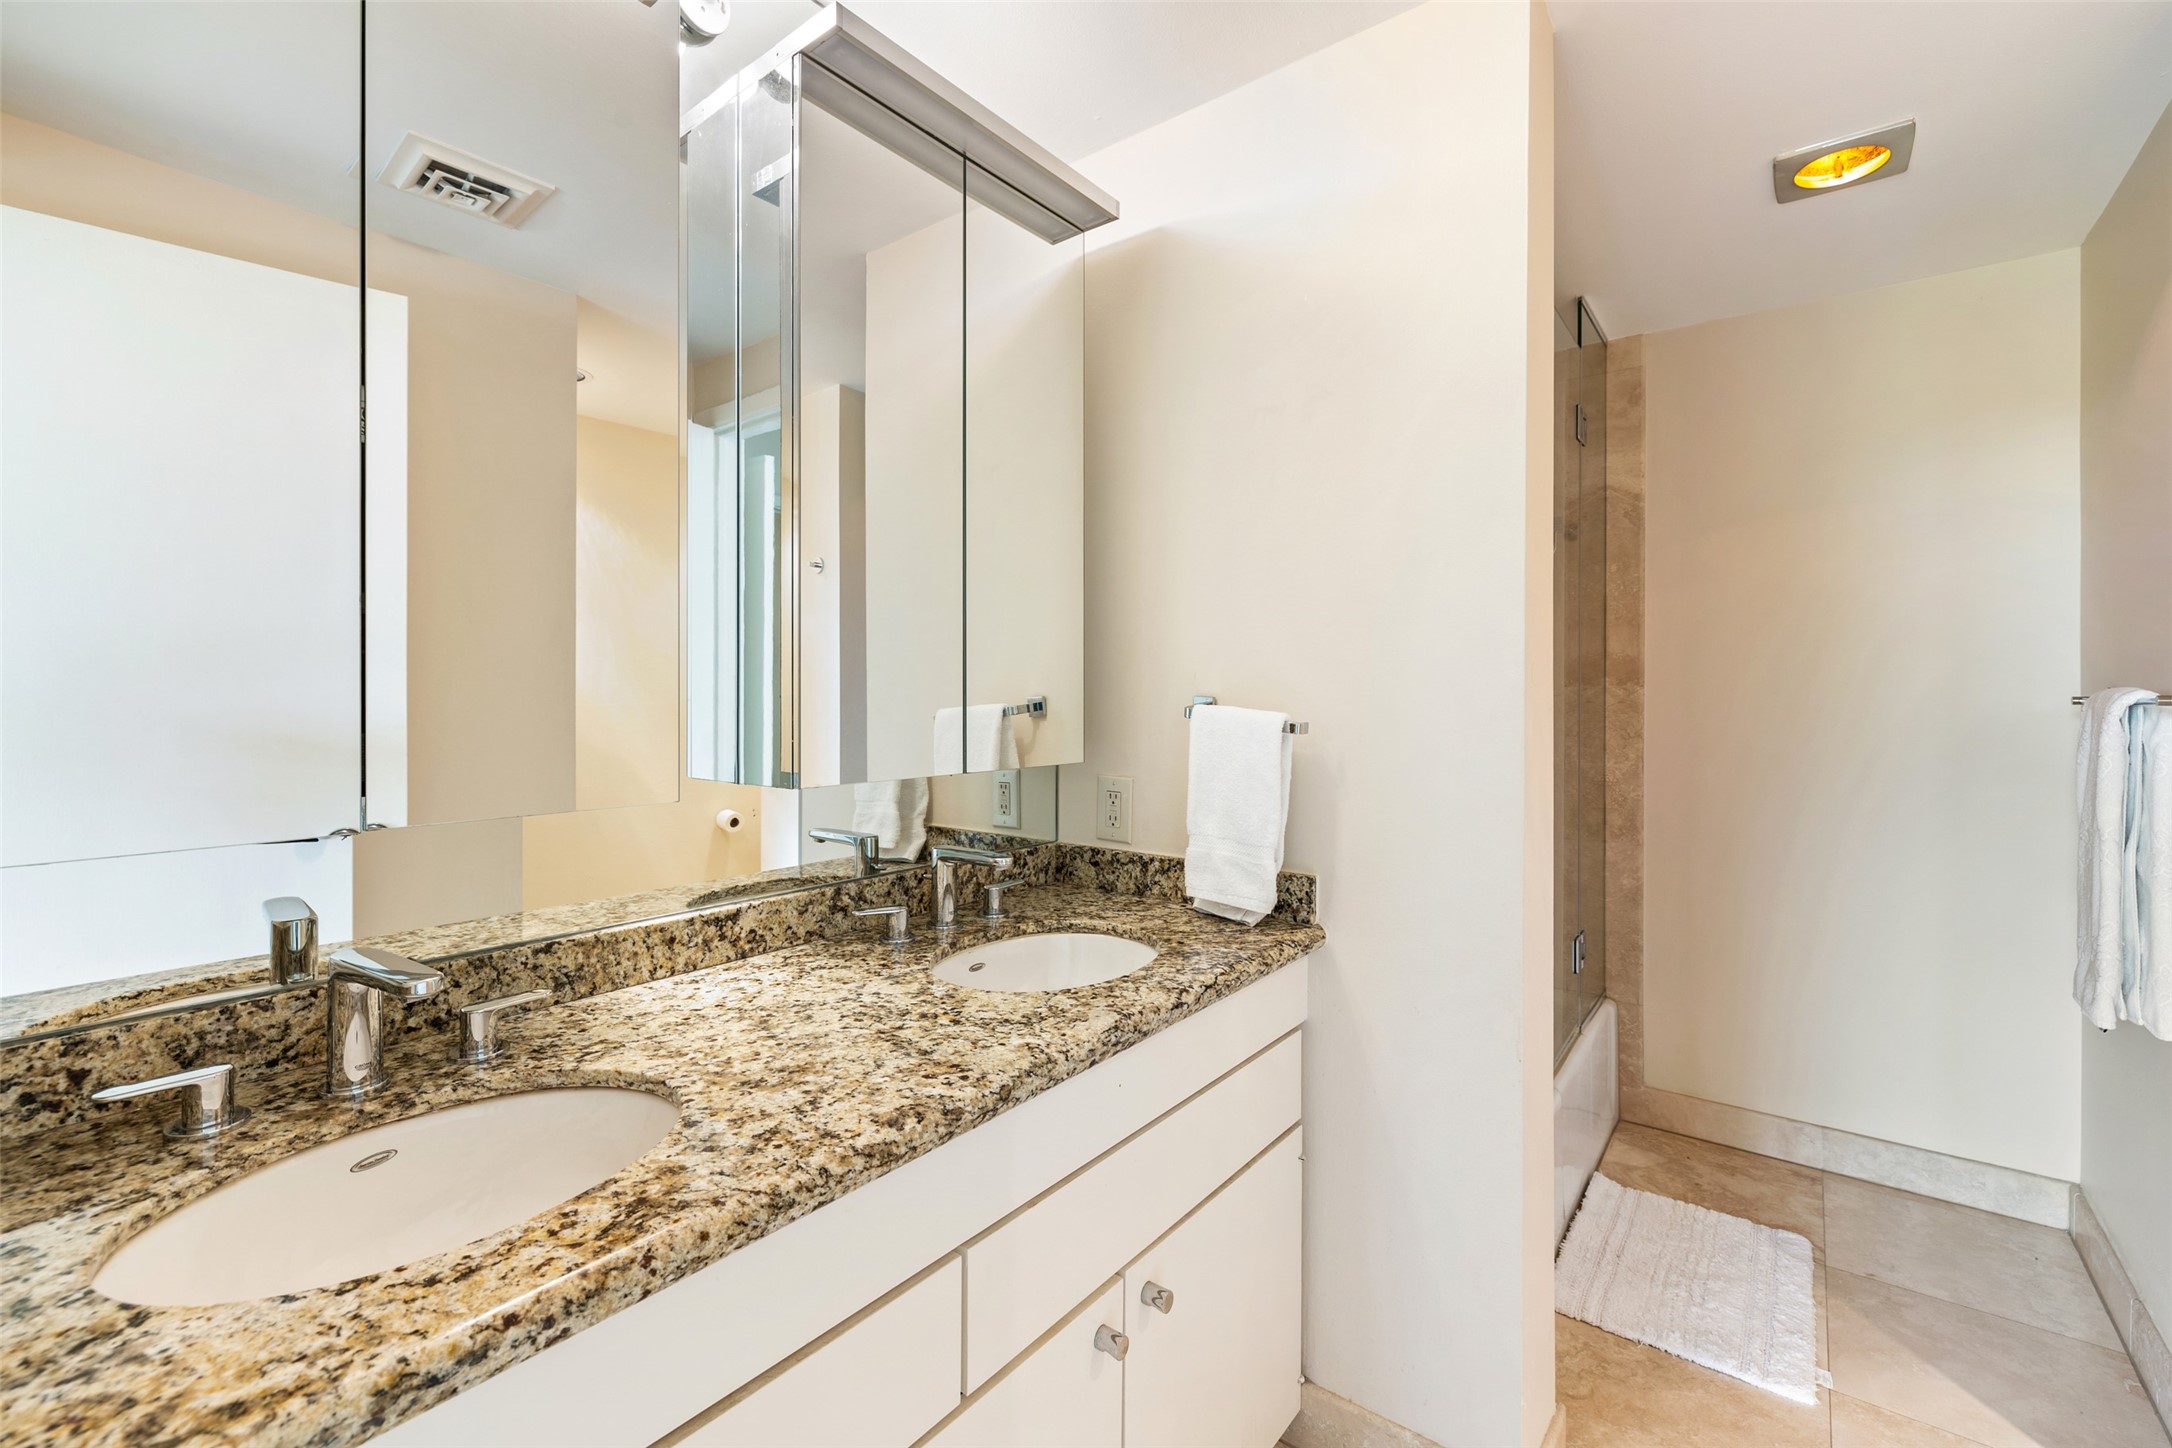 The primary bathroom has a double sink vanity equipped with granite countertops and mirrored backsplash and medicine cabinetry.